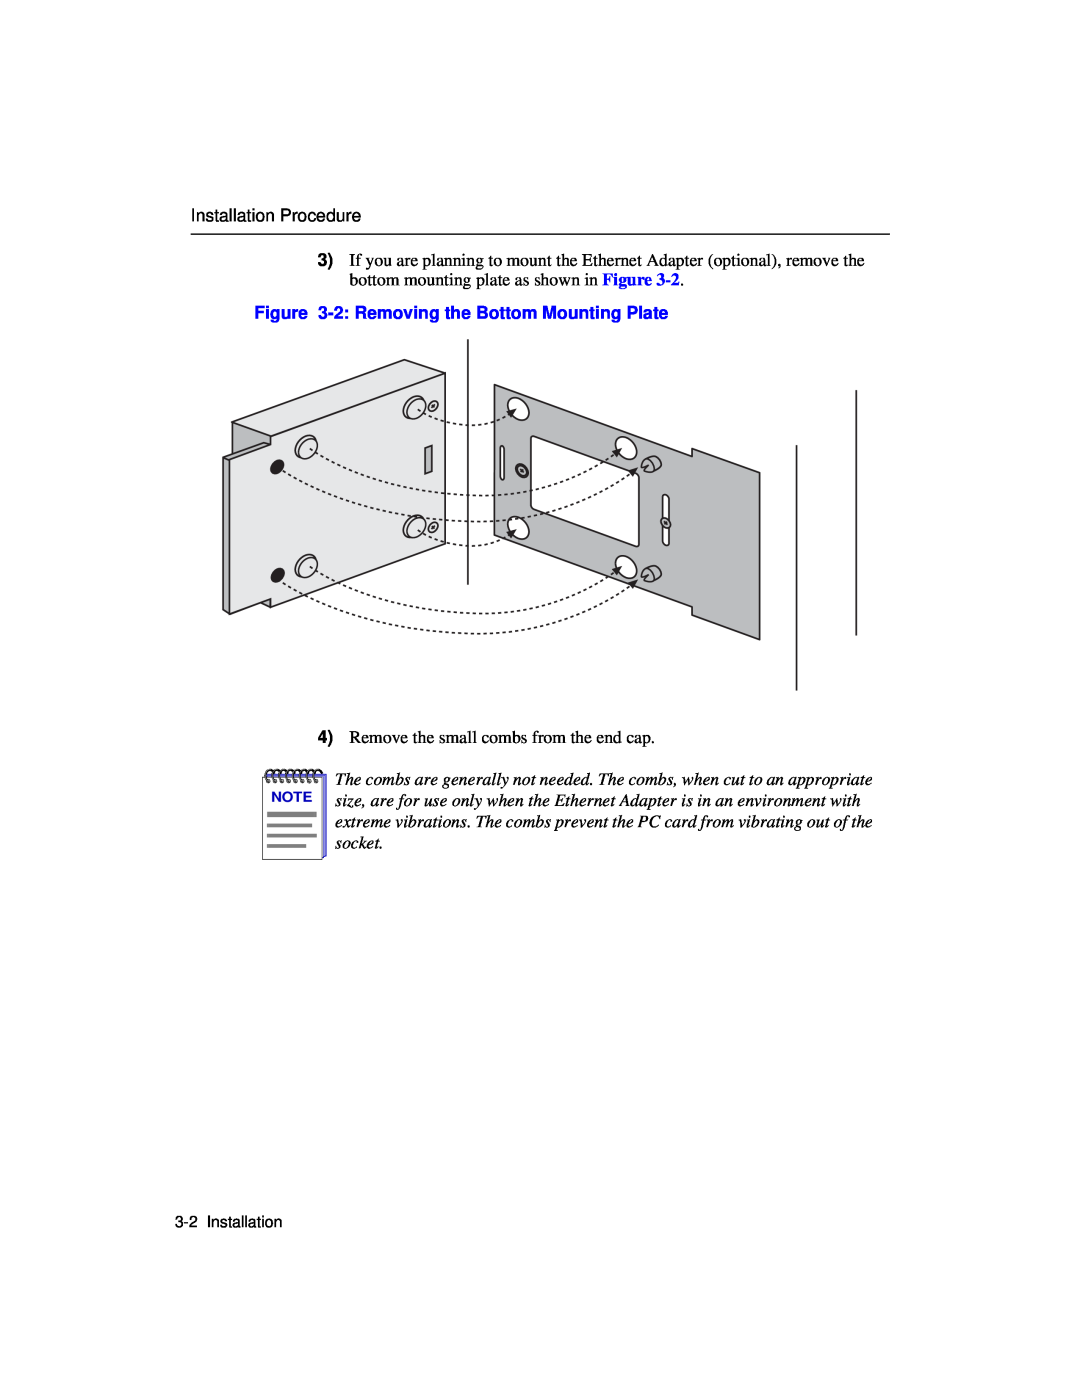 Enterasys Networks Wireless Ethernet Adapter I manual 2 Removing the Bottom Mounting Plate 